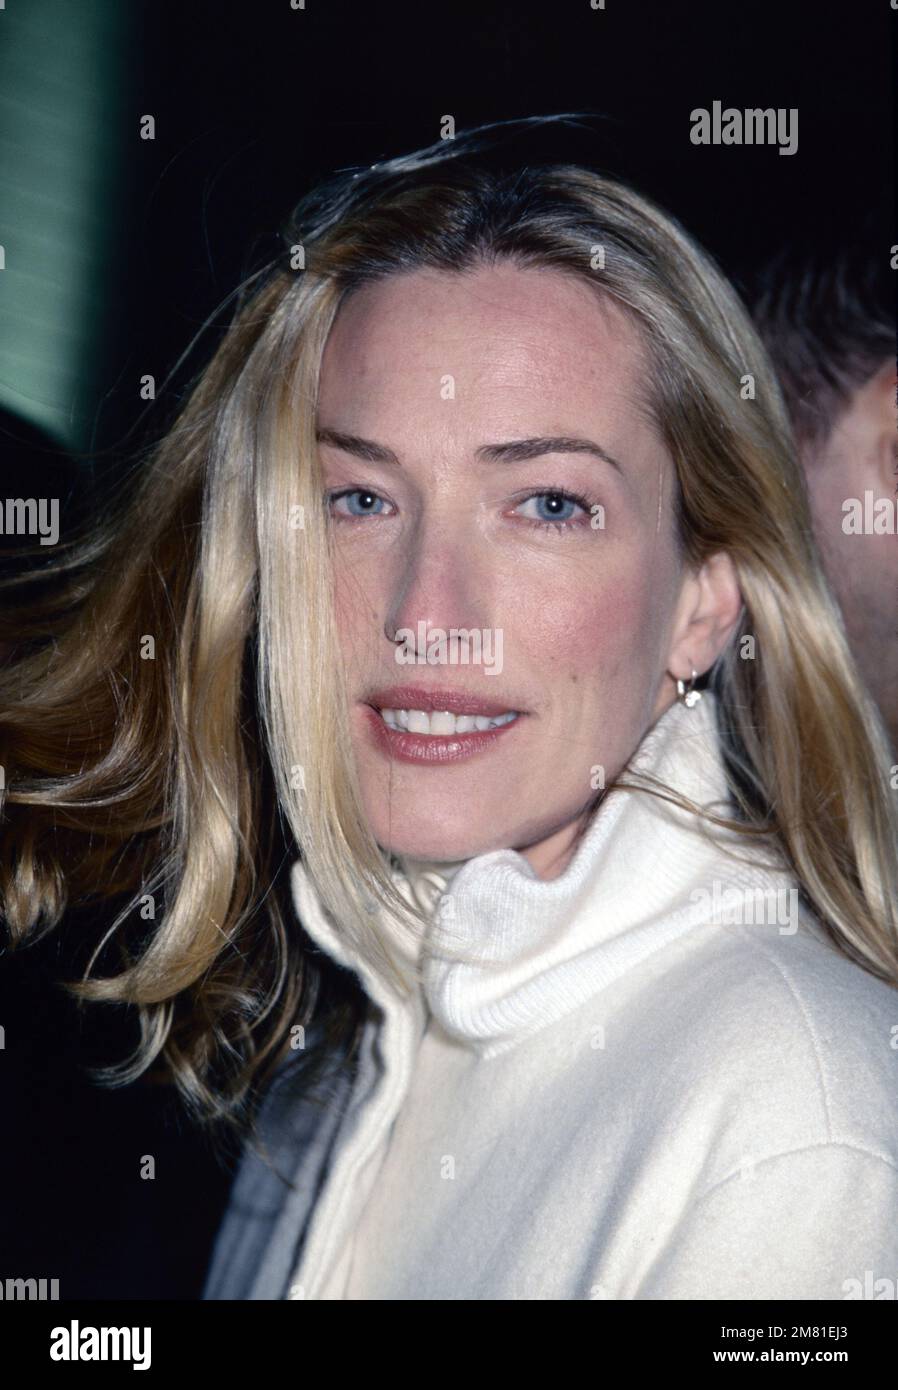 **FILE PHOTO** Tatjana Patitz Has Passed Away at 56. Tatjana Patitz attends the premiere of 'Mod Squad' at Chelsea West Cinemas in New York City on February 13, 1999. Photo Credit: Henry McGee/MediaPunch Stock Photo